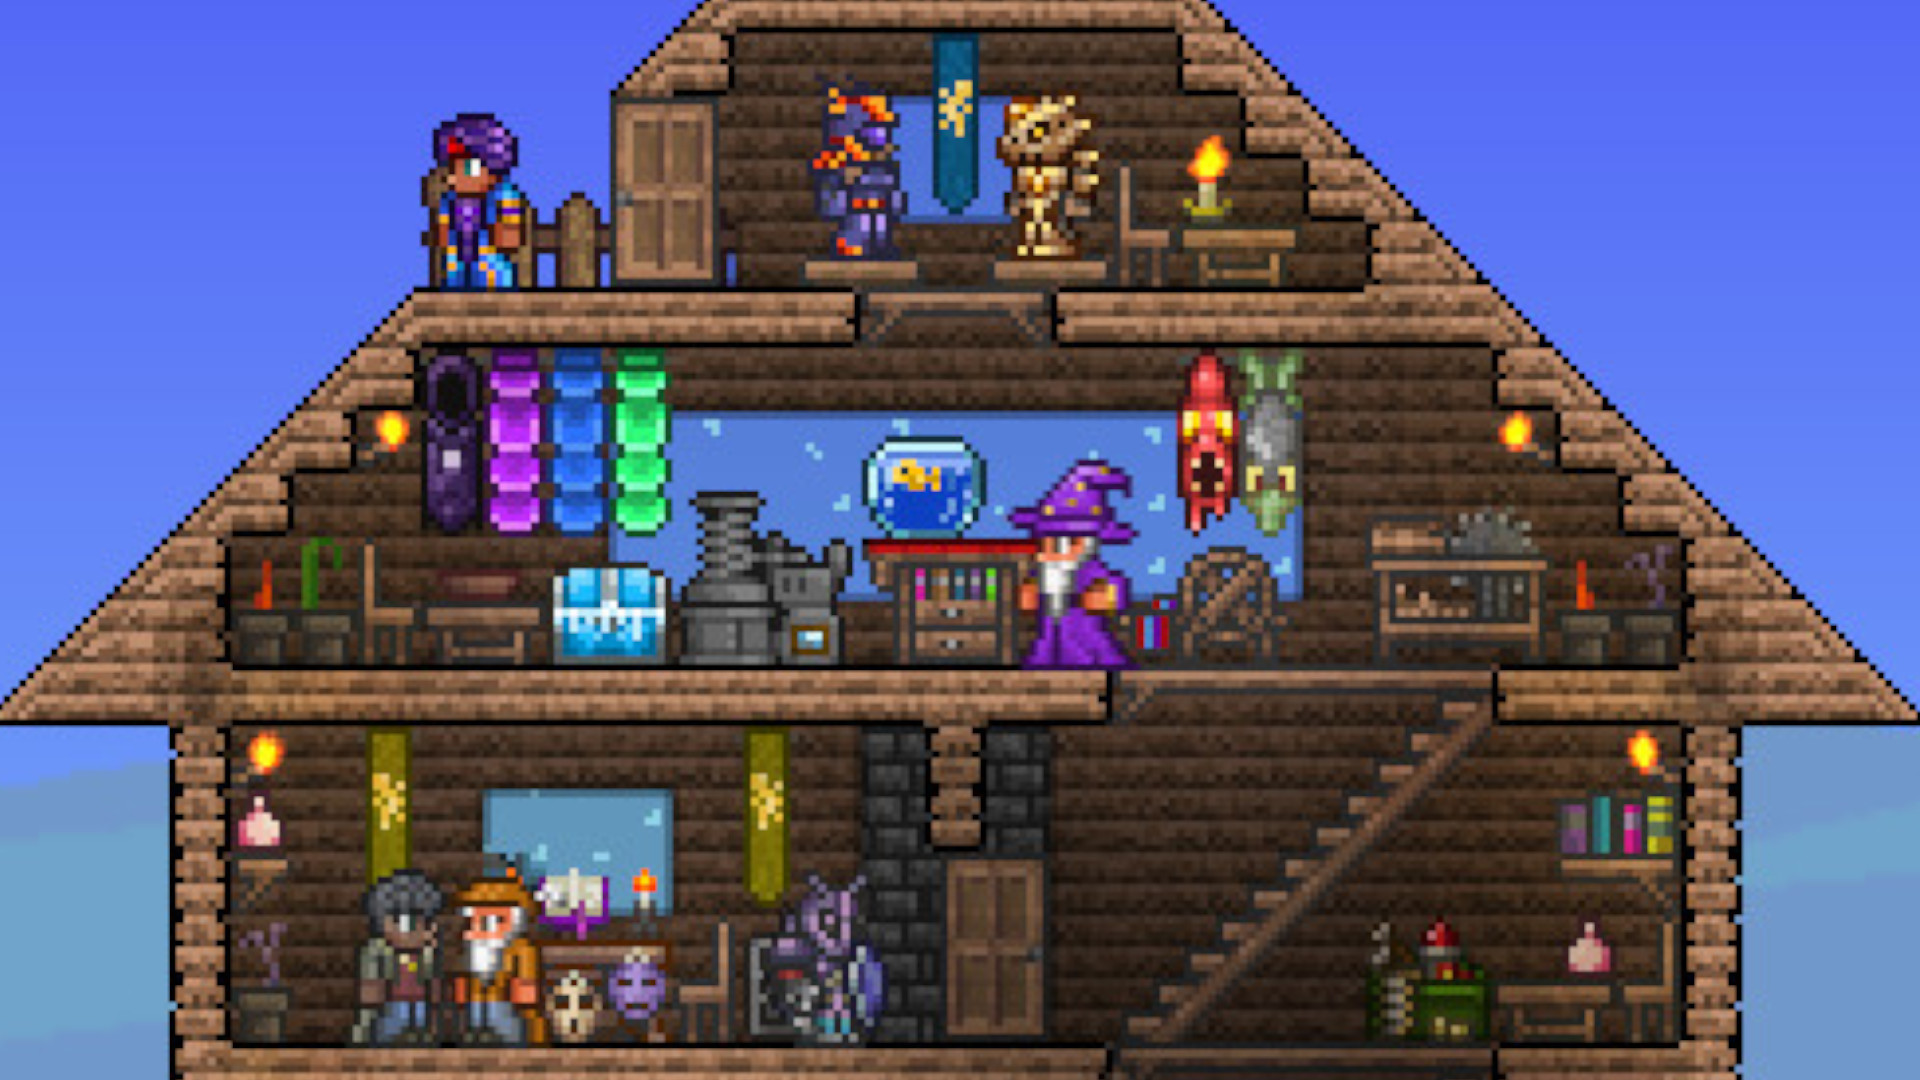 Your Terraria inventory is about to get a massive upgrade